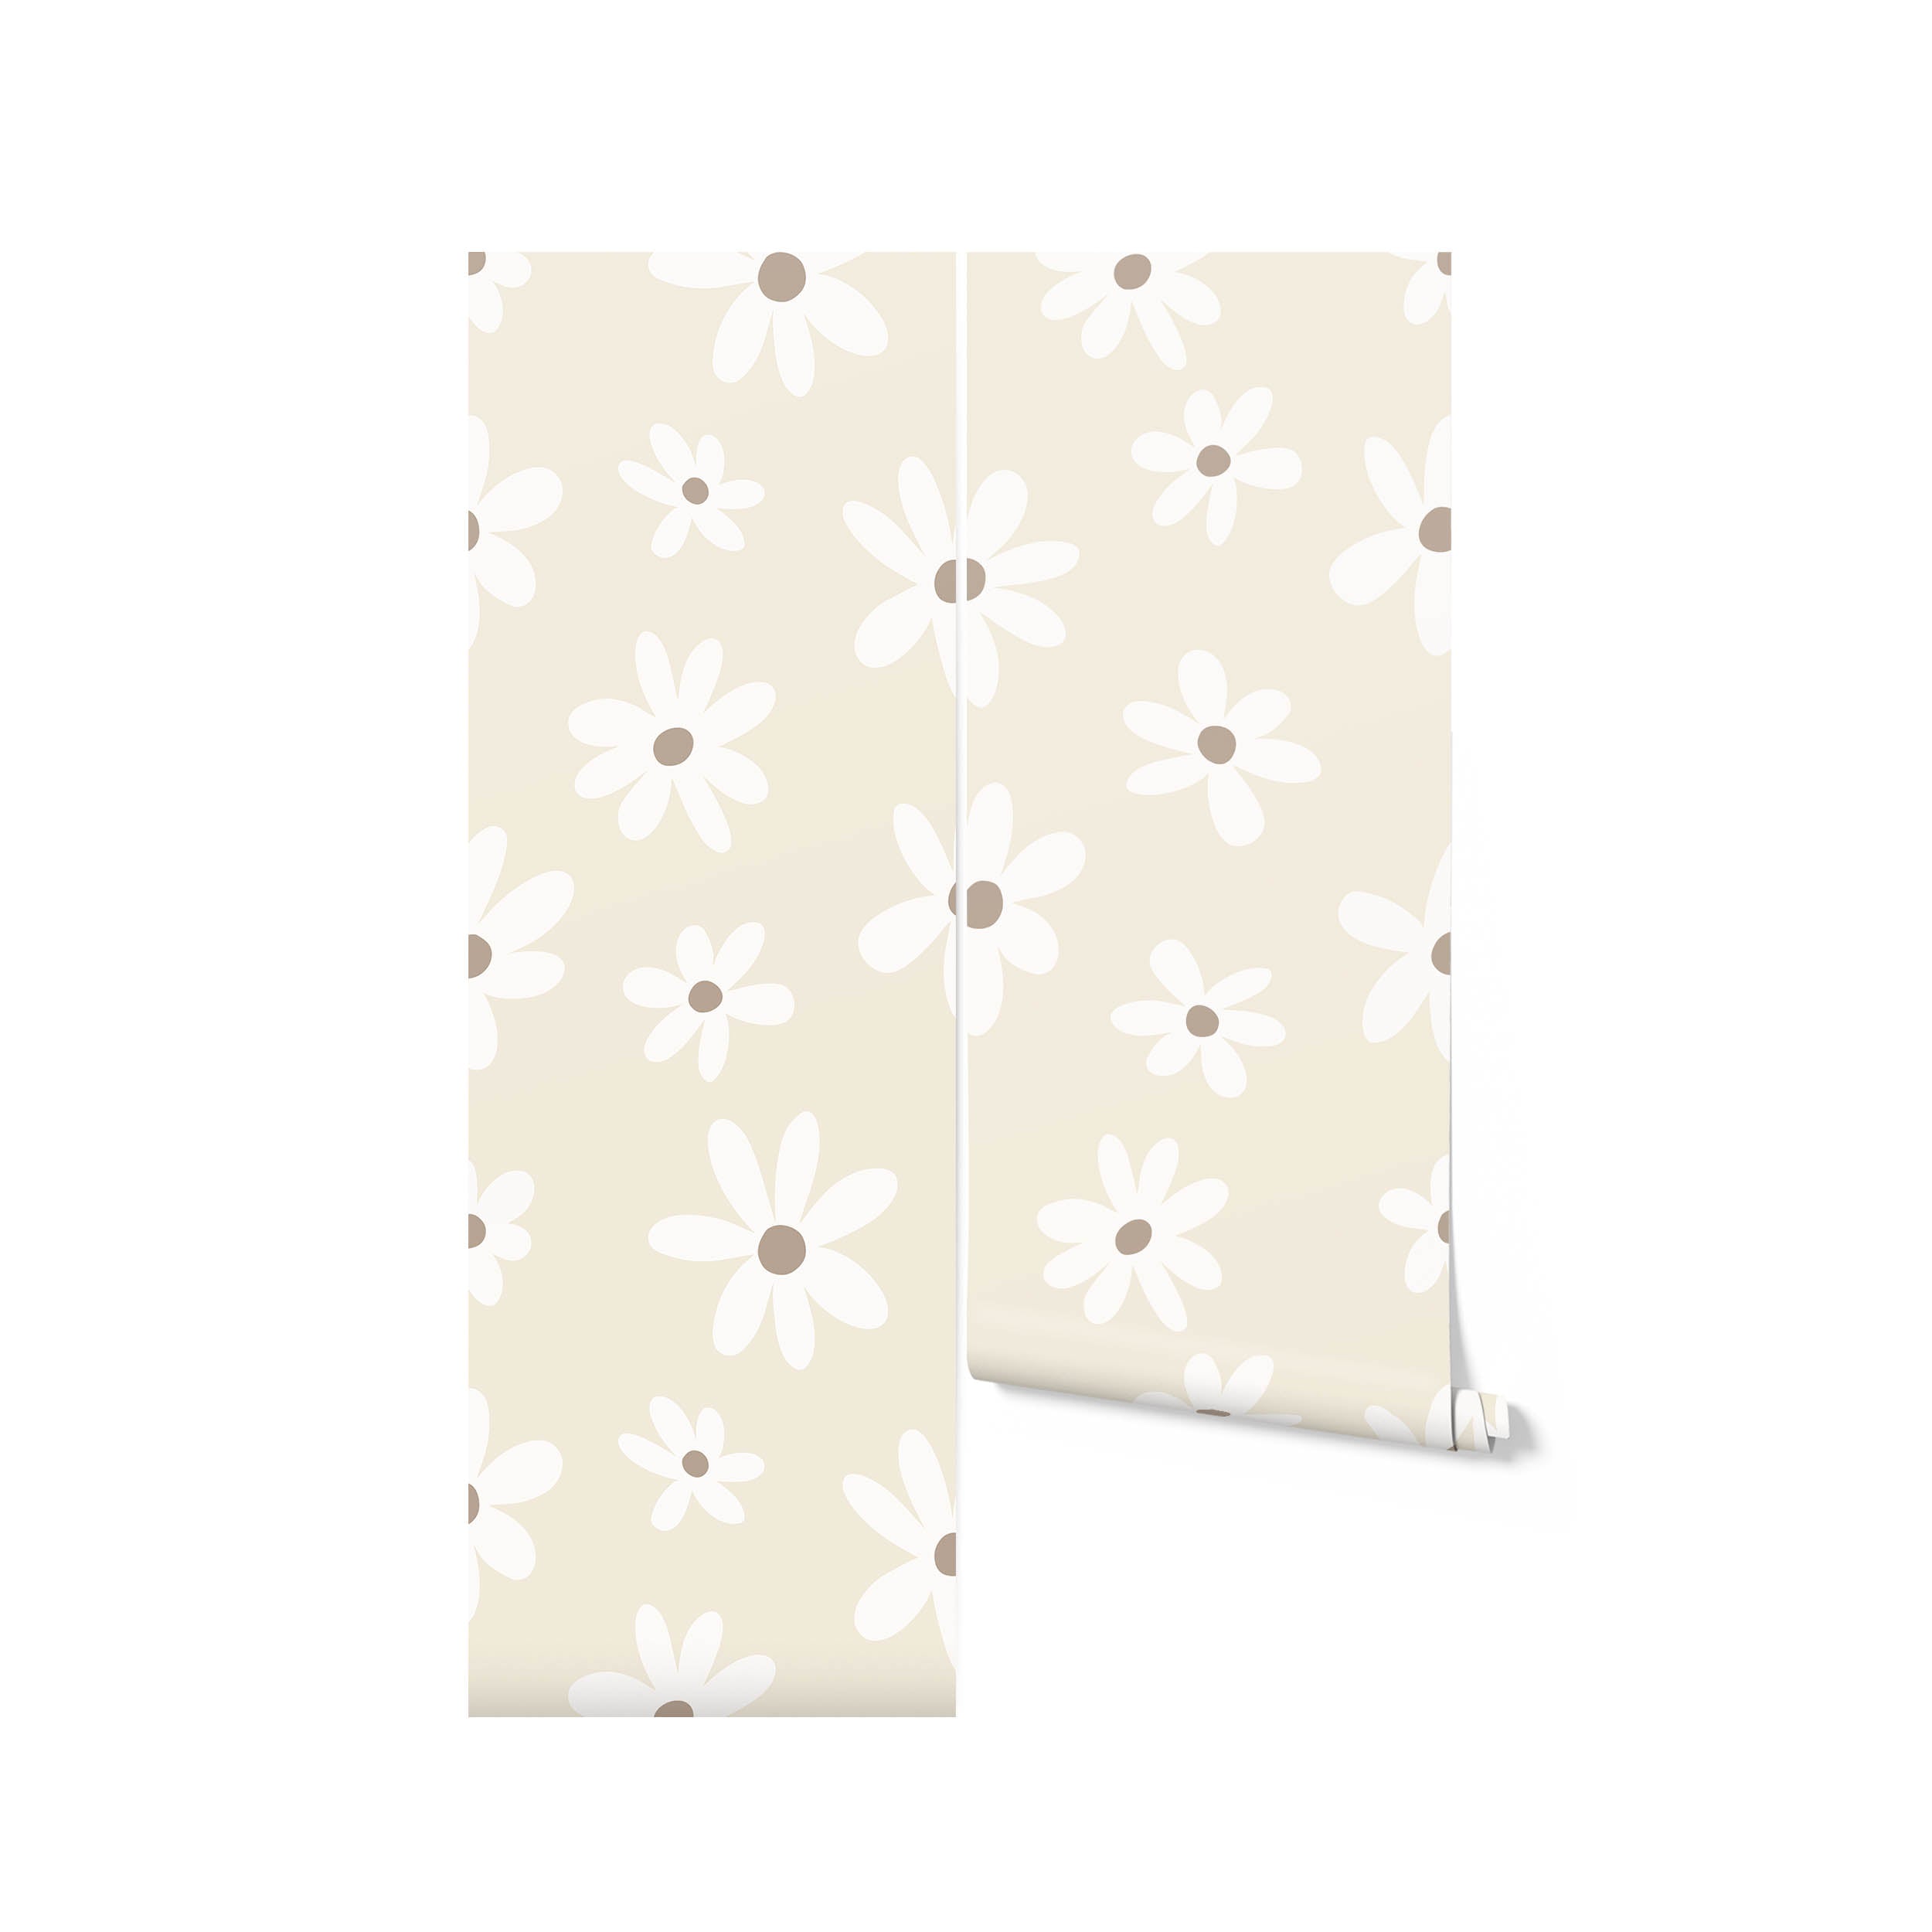 An image of a roll of the Simple Daisy Wallpaper, showing off the pattern of white daisies on a beige background. This wallpaper roll is ideal for anyone looking to infuse their living space with a bright, floral motif that is both simple and stylish.